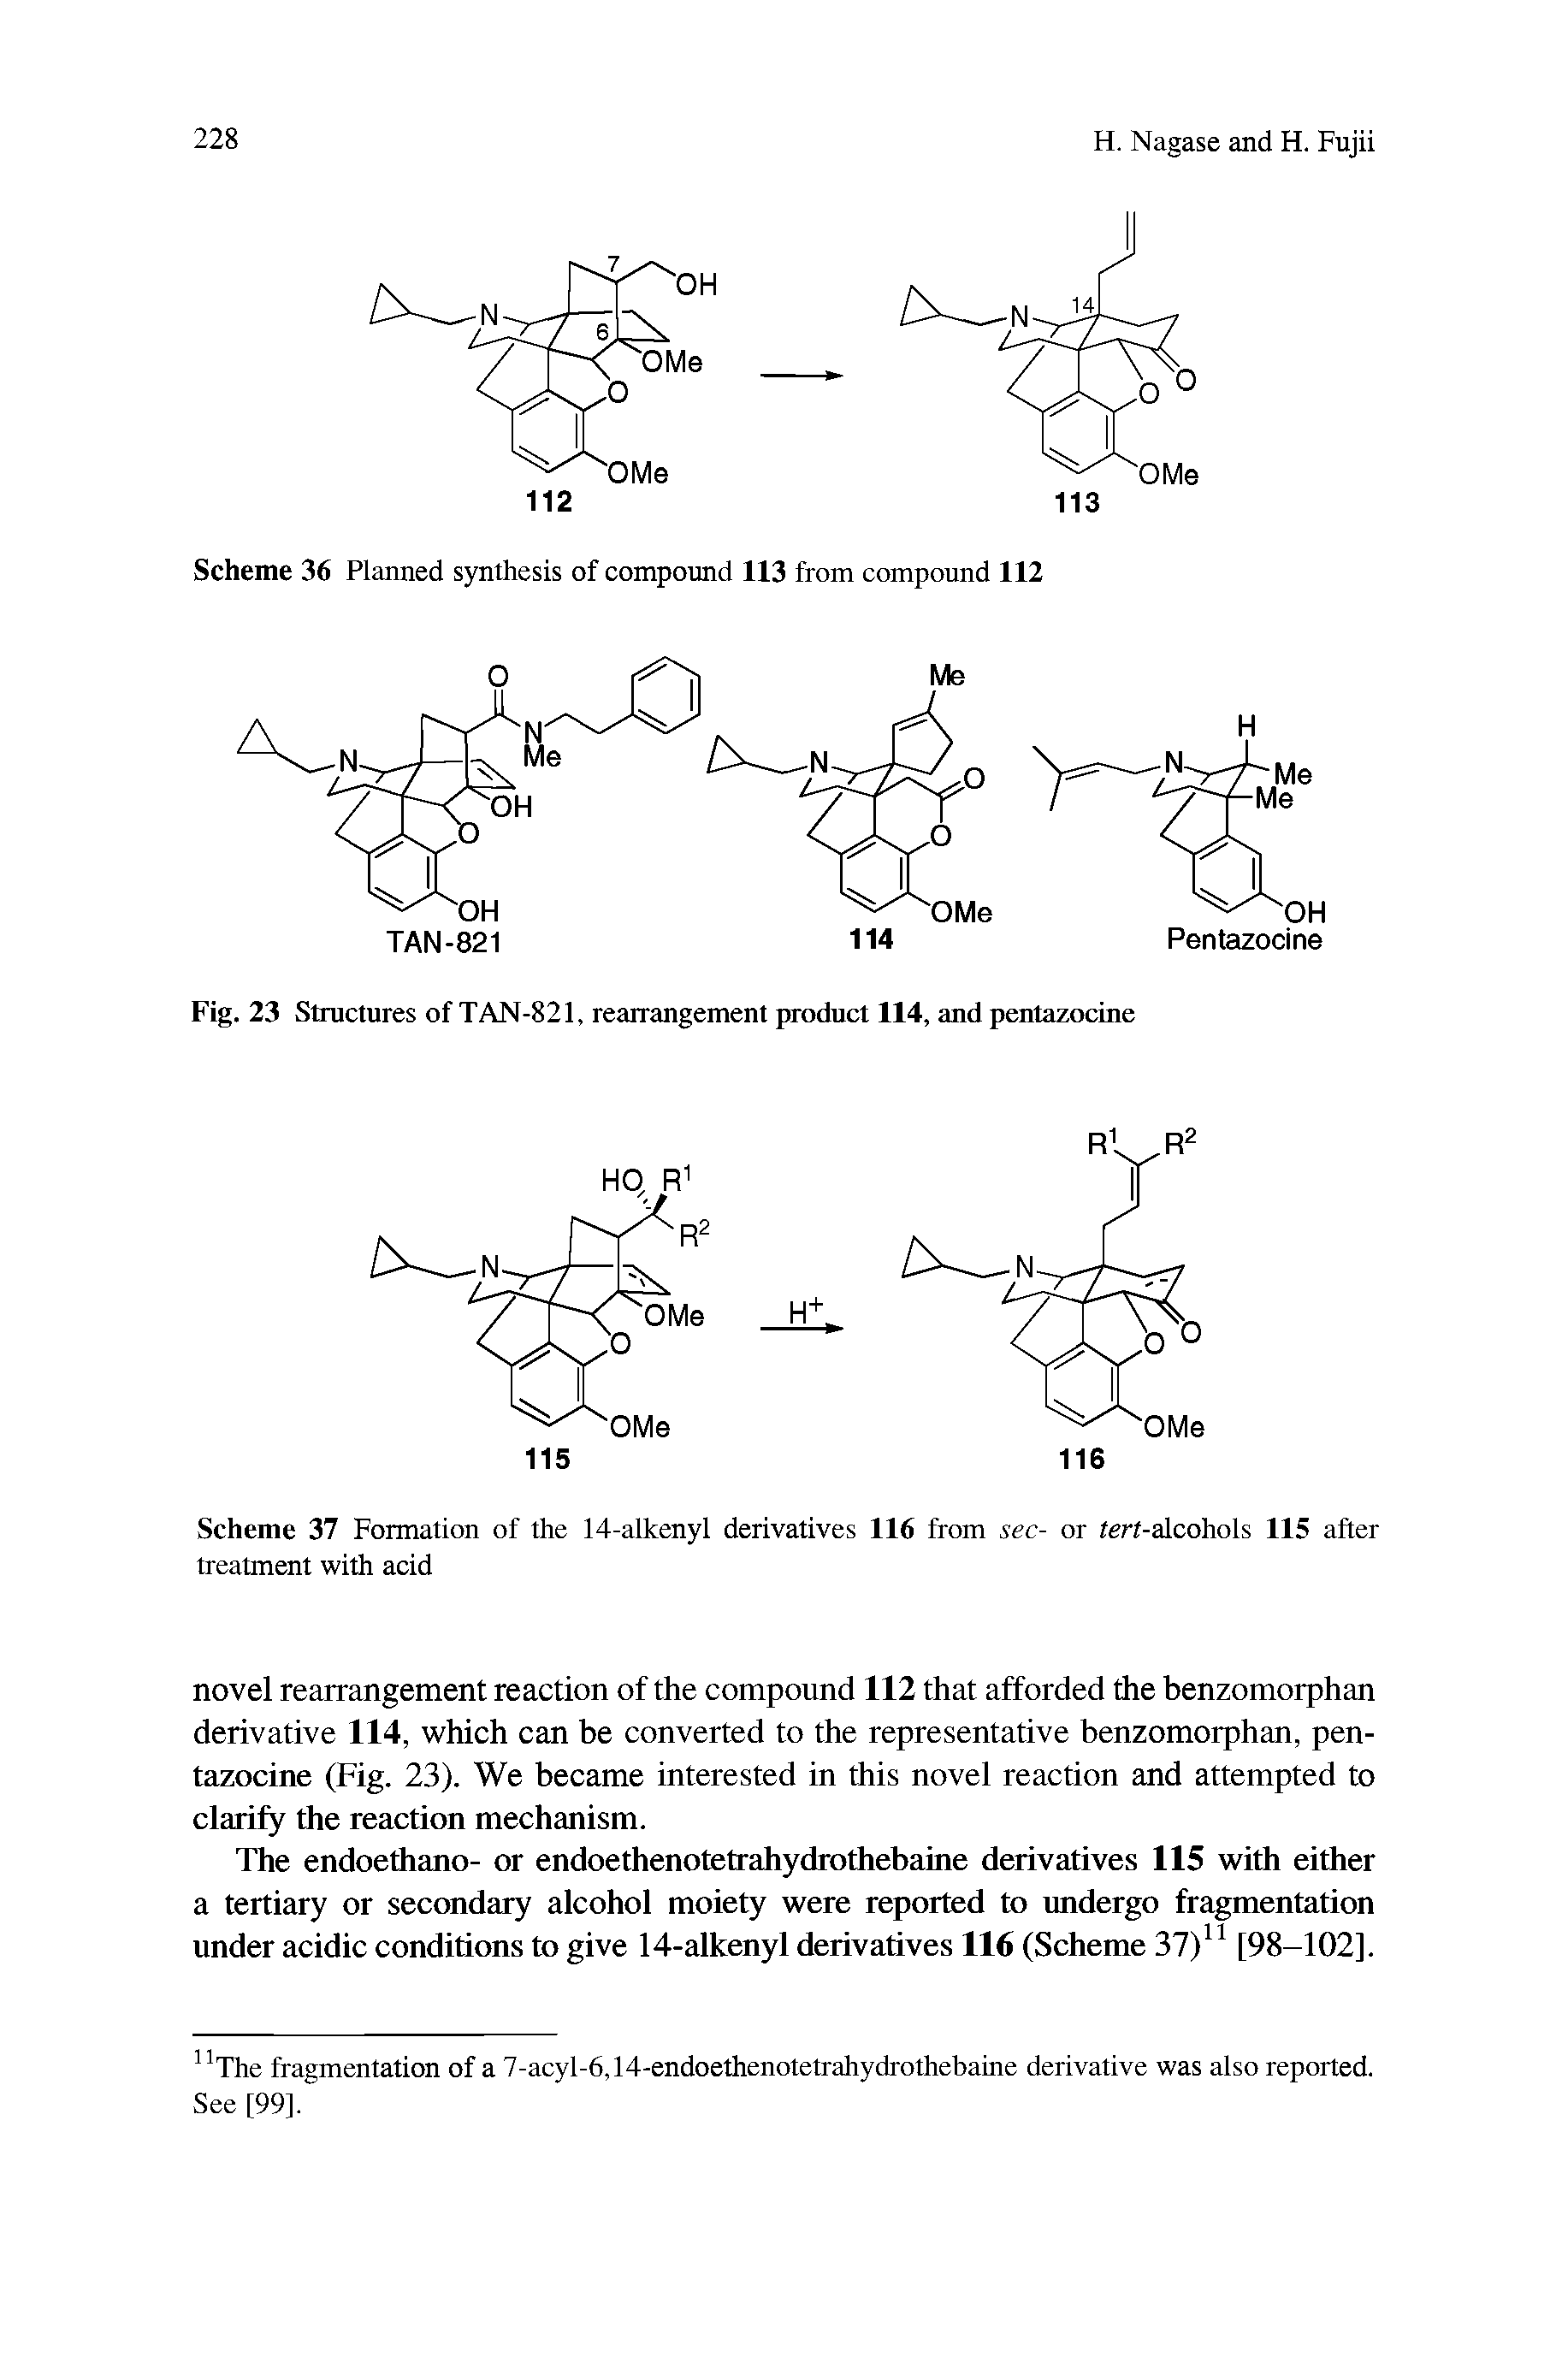 Scheme 37 Formation of the 14-alkenyl derivatives 116 from sec- or tert-alcohols 115 after treatment with acid...